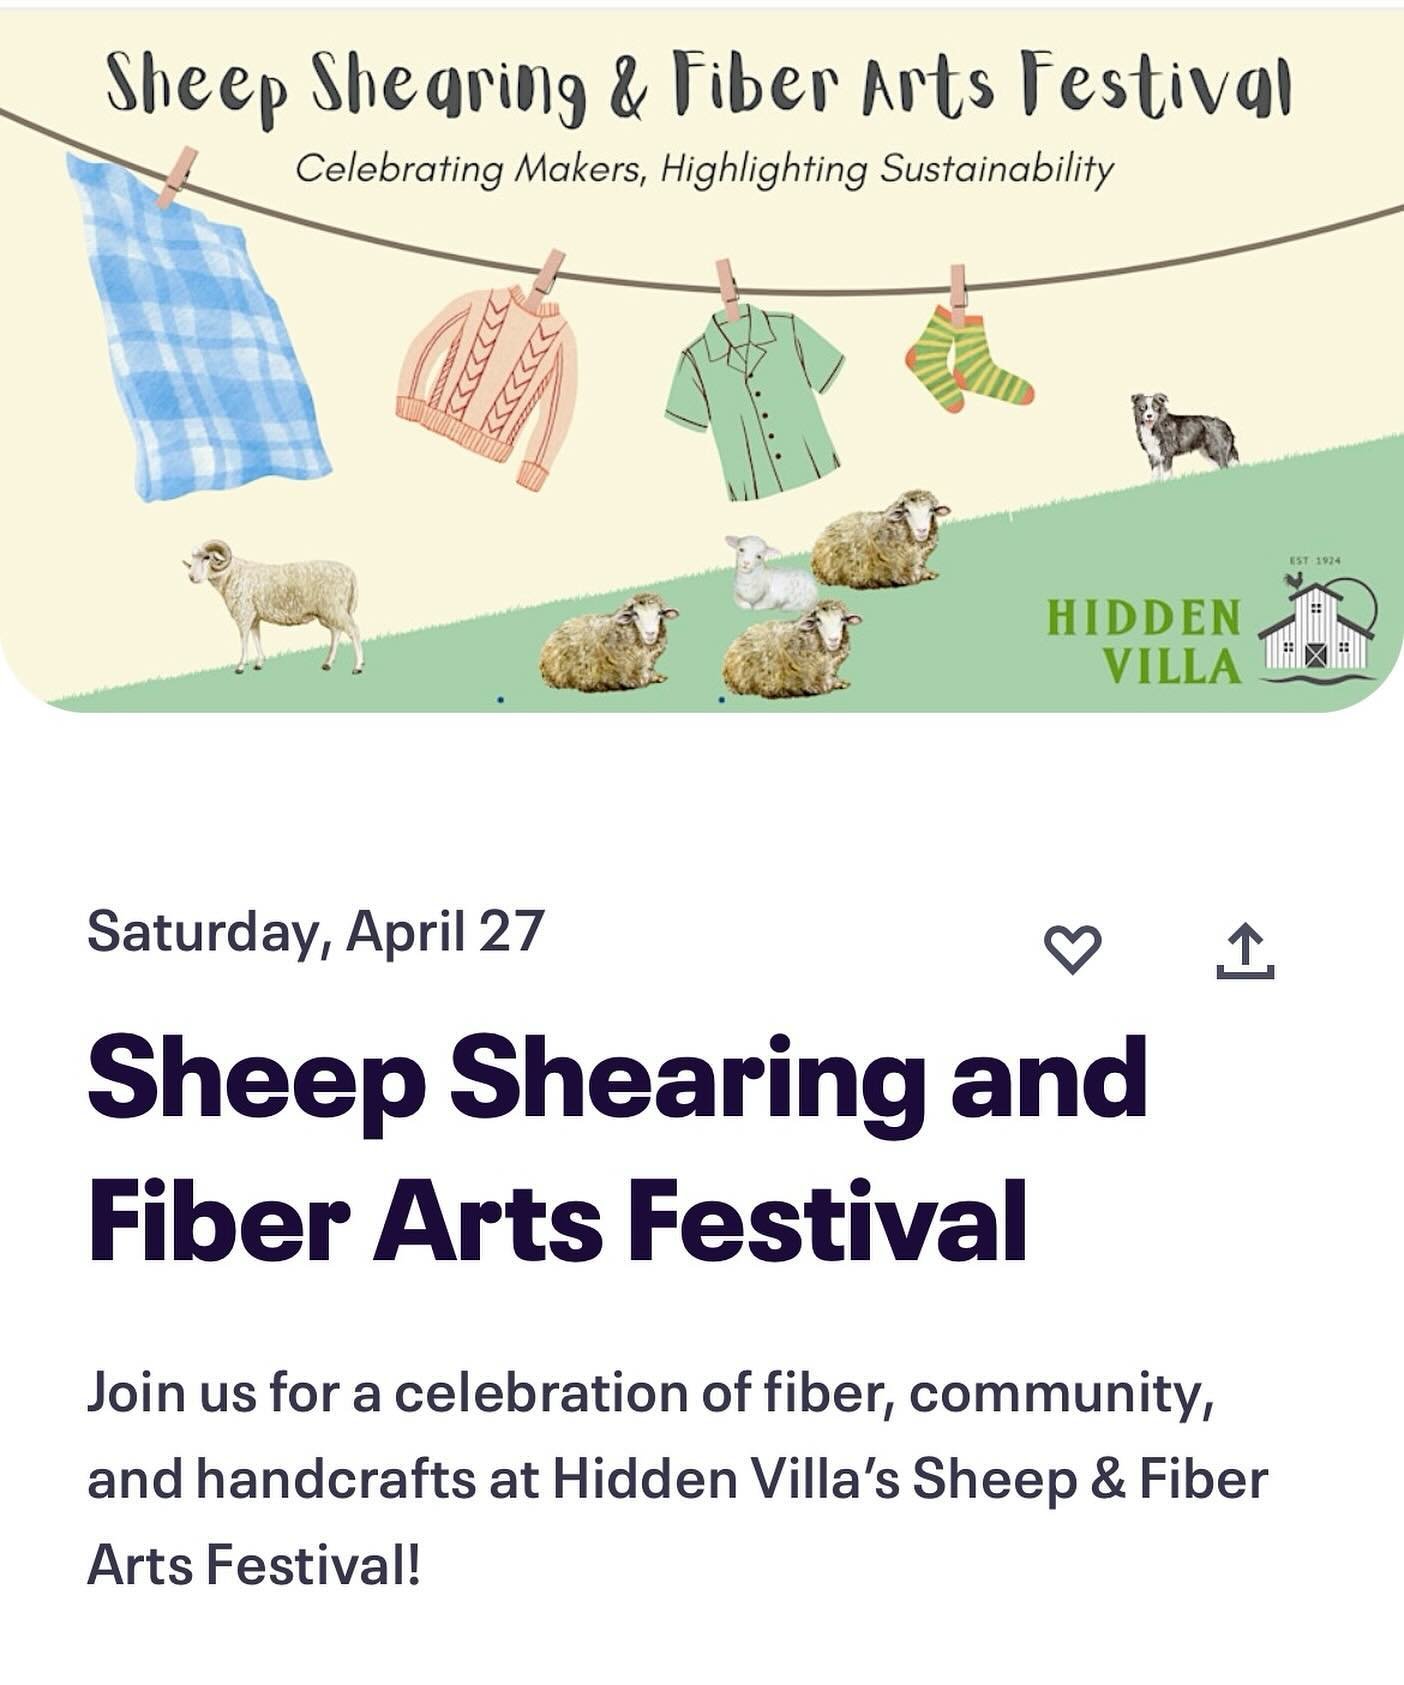 I am happy to share that I&rsquo;ll be showing several of my quilts (including the first 3 of the Dream Shape quilts&hellip; 🤗) at Hidden Villa&rsquo;s Sheep Shearing &amp; Fiber Arts Festival two weeks from tomorrow in the Los Altos Hills. Saturday